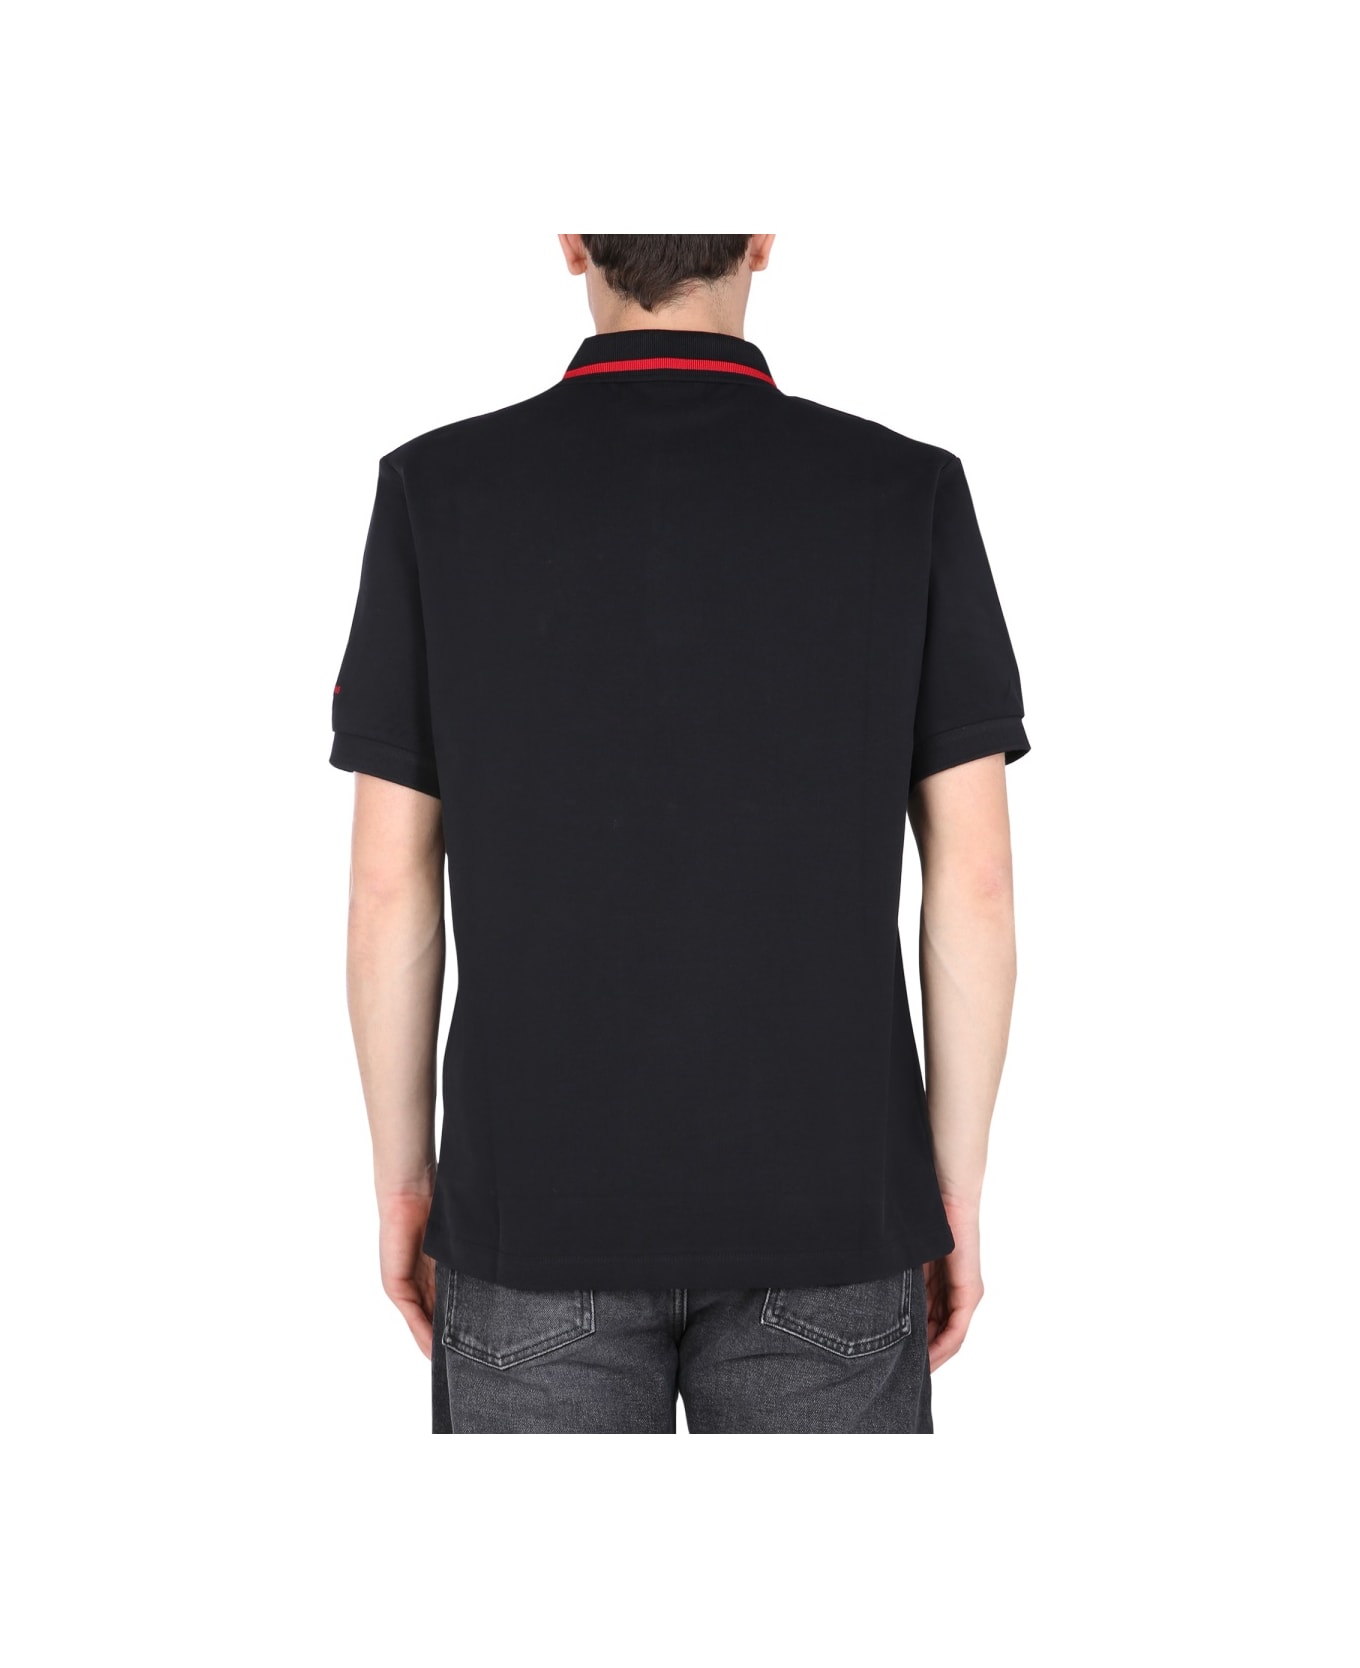 Fred Perry by Raf Simons Regular Fit Polo - BLACK ポロシャツ